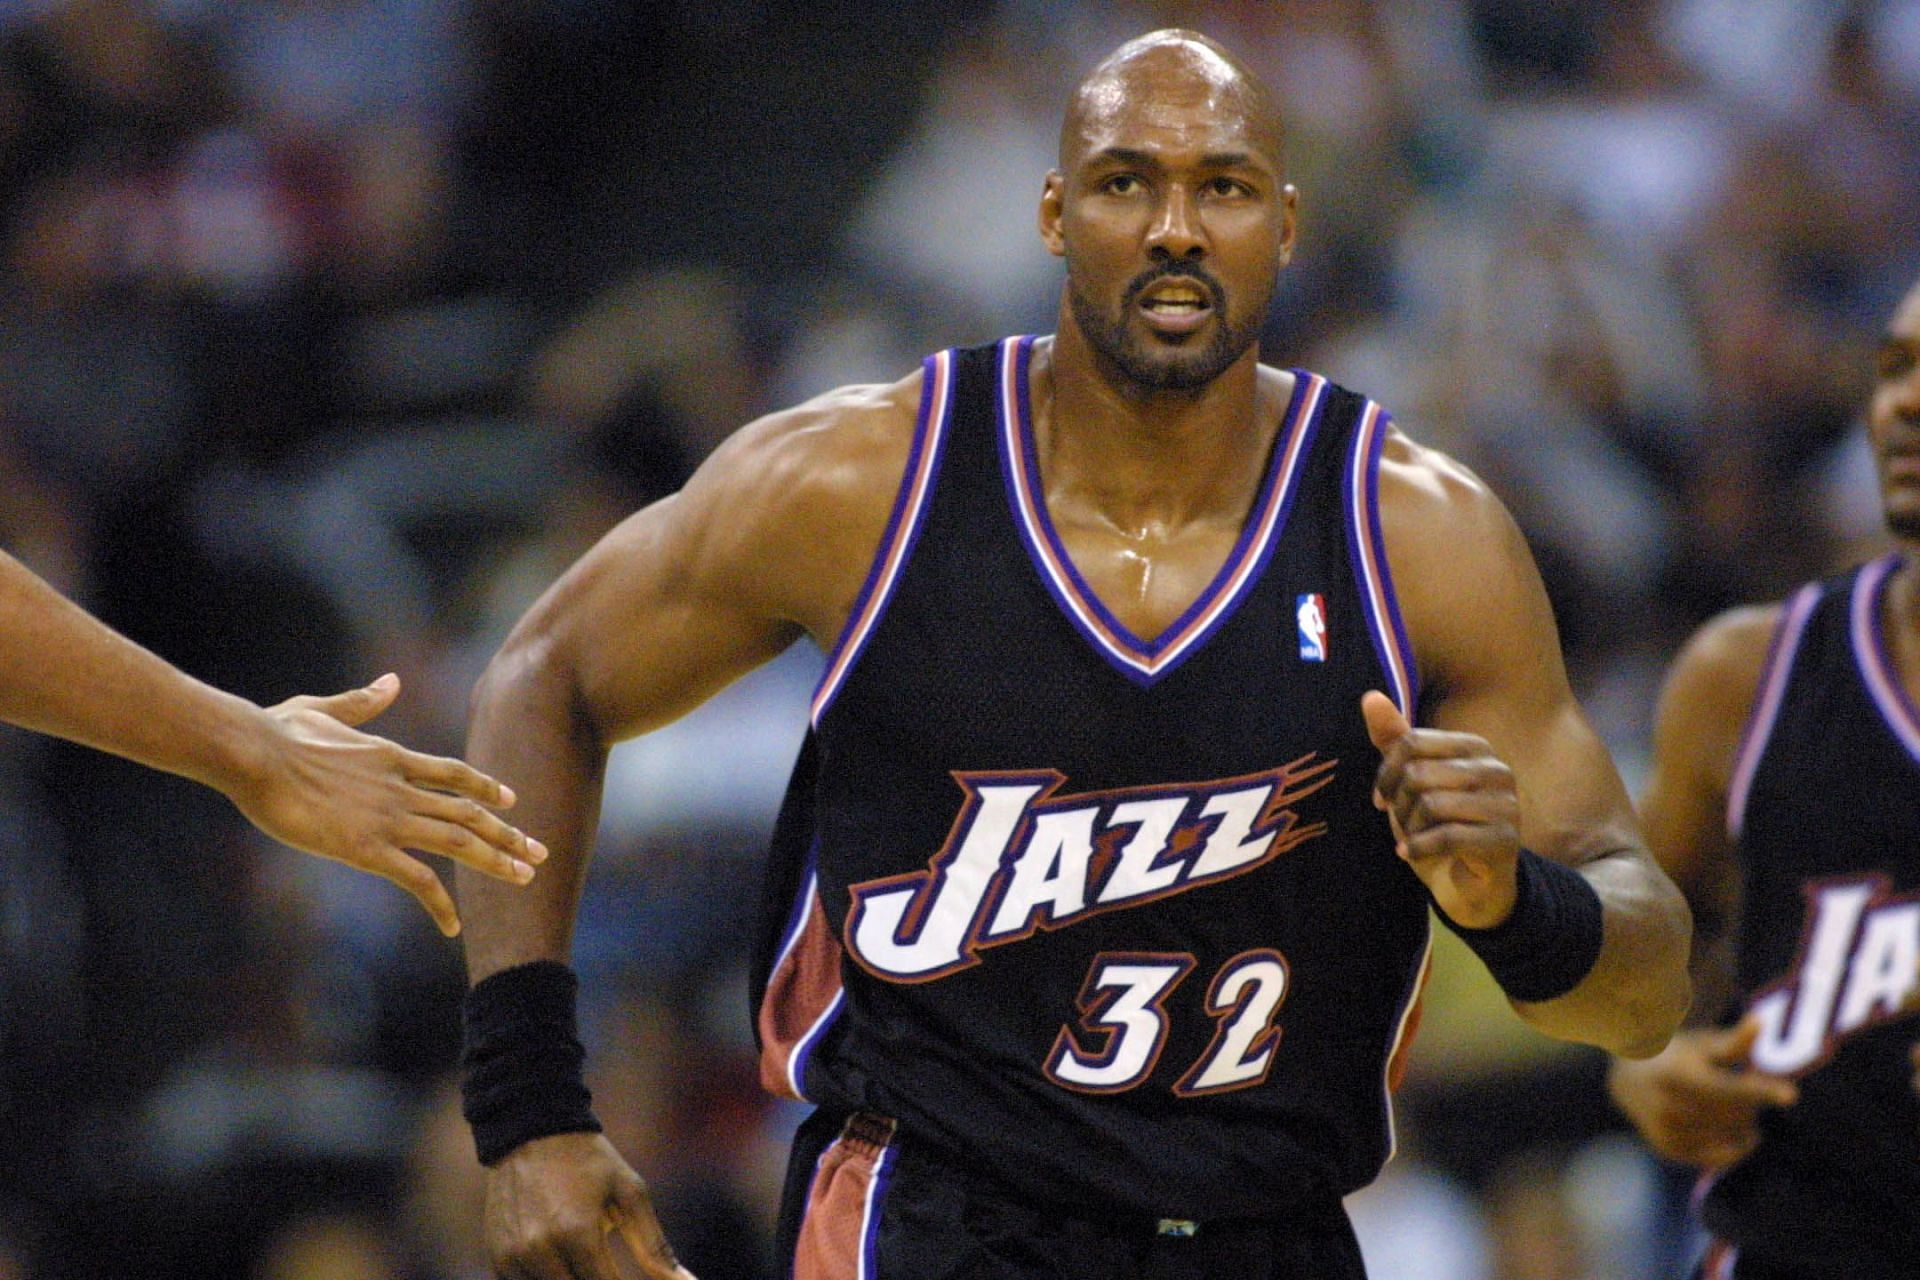 karl malone gonna give out the first 13 in dunk contest history